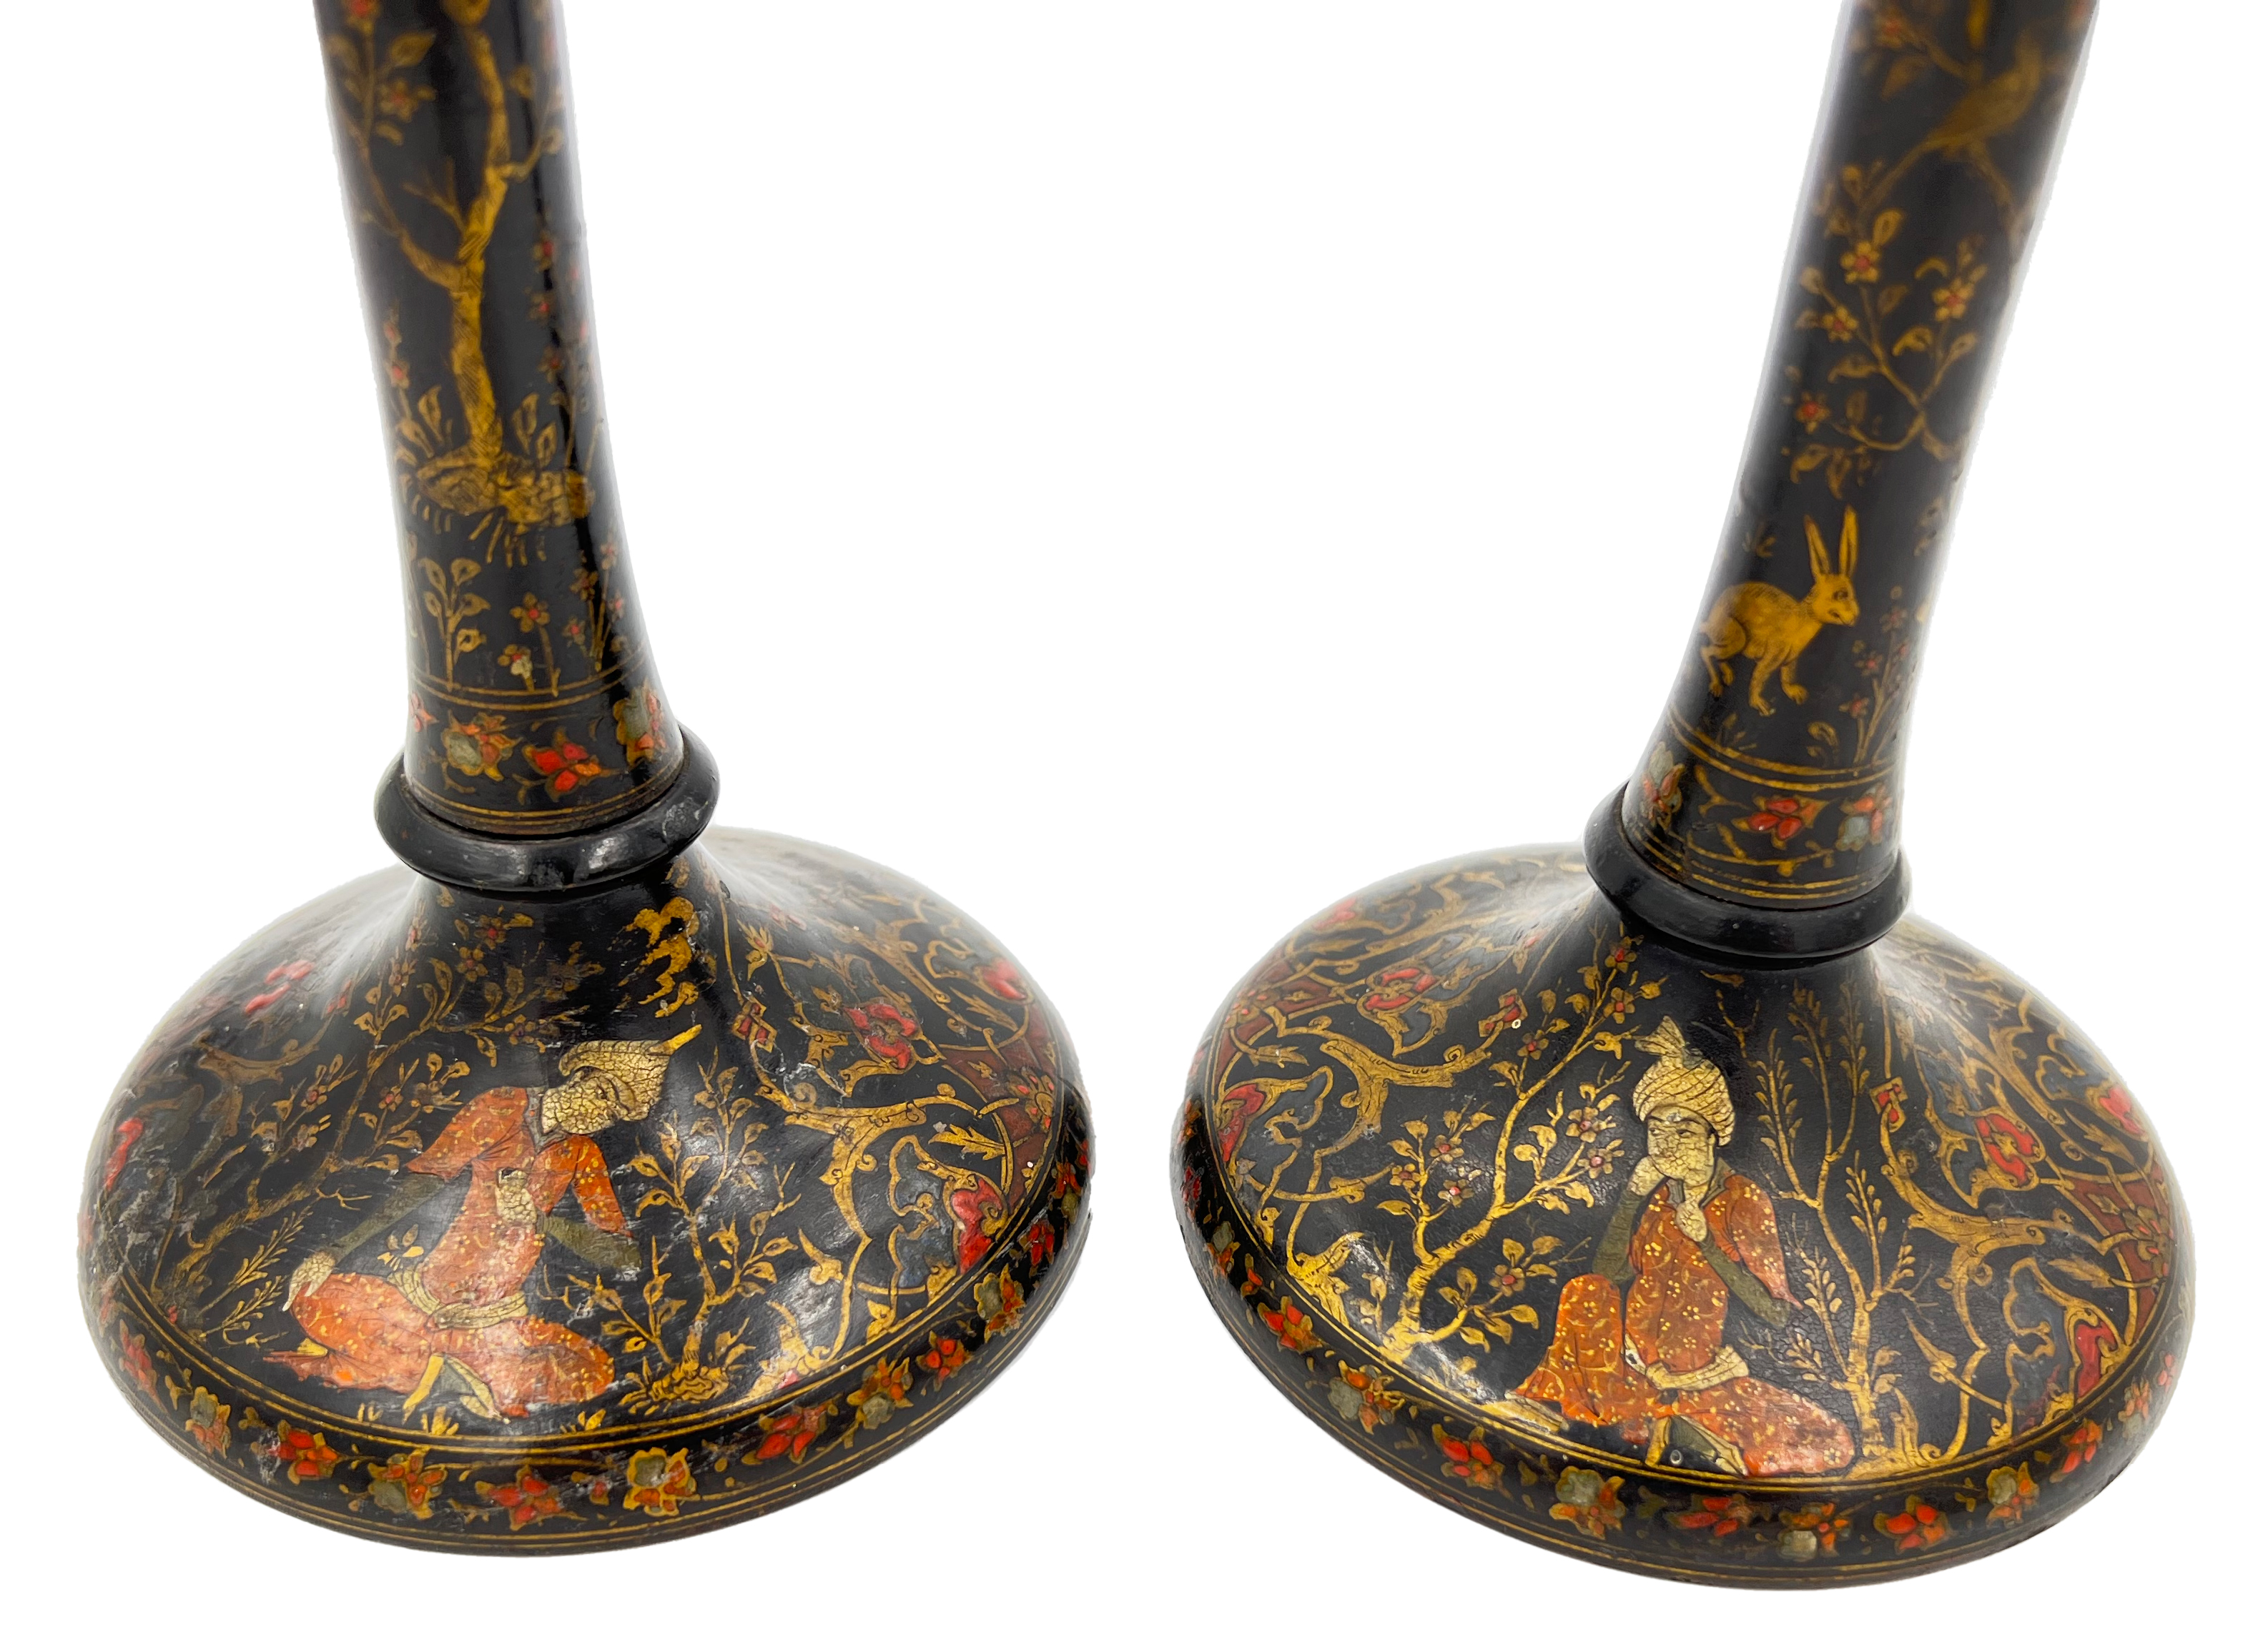 PAIR OF PERSIAN CANDLE HOLDERS, POSSIBLY QAJAR ERA - Image 6 of 6